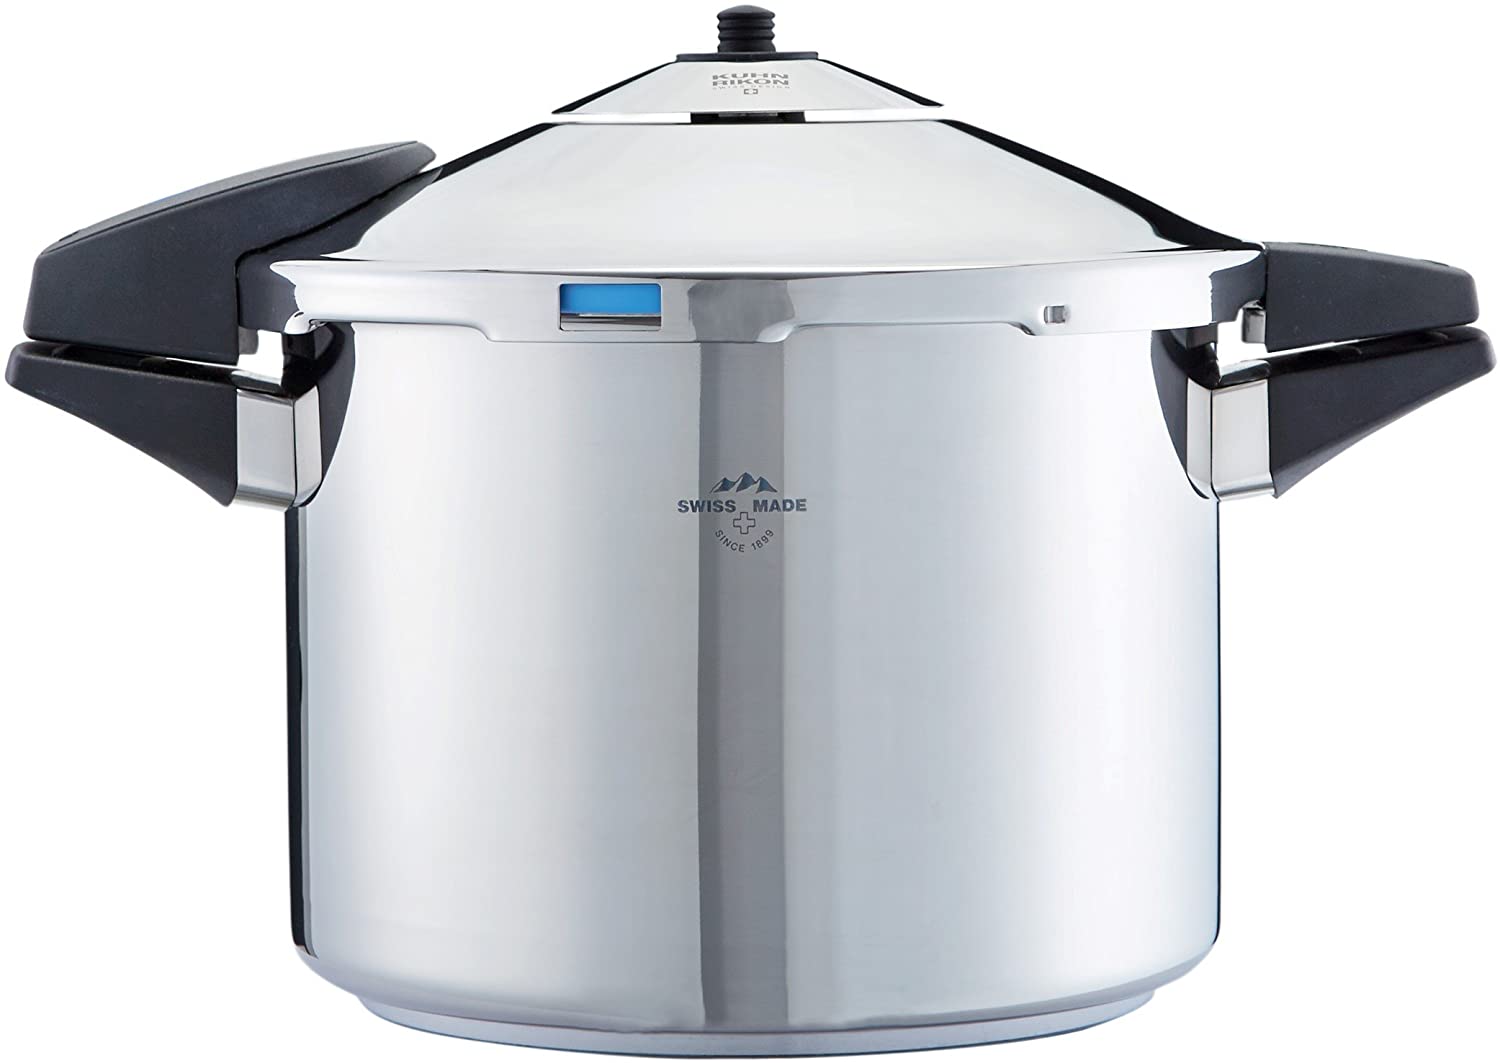 Kuhn Rikon Duromatic Comfort 30902 Pressure Cooker with Bluetooth Function Side Handle Model Stainless Steel 8 Litres 22 cm